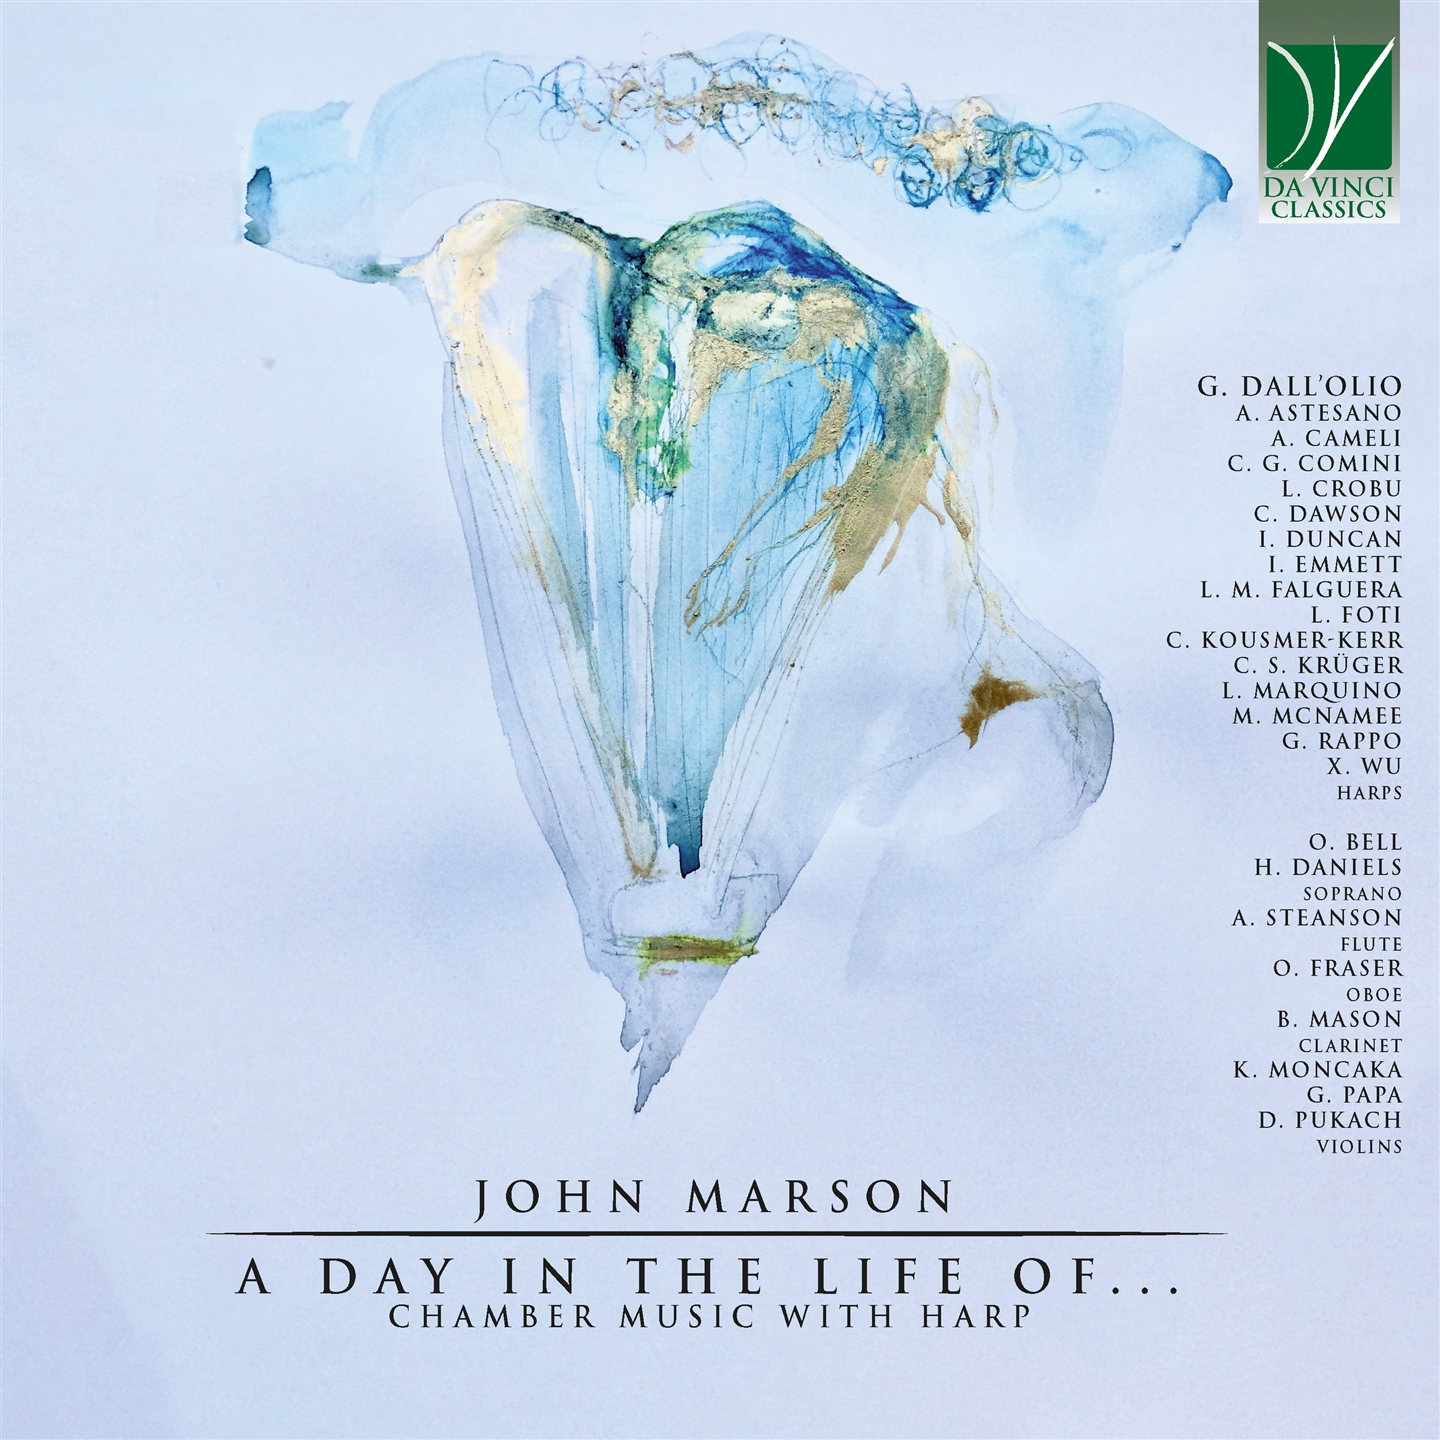 JOHN MARSON: A DAY IN THE LIFE OF..., CHAMBER MUSIC WITH HARP